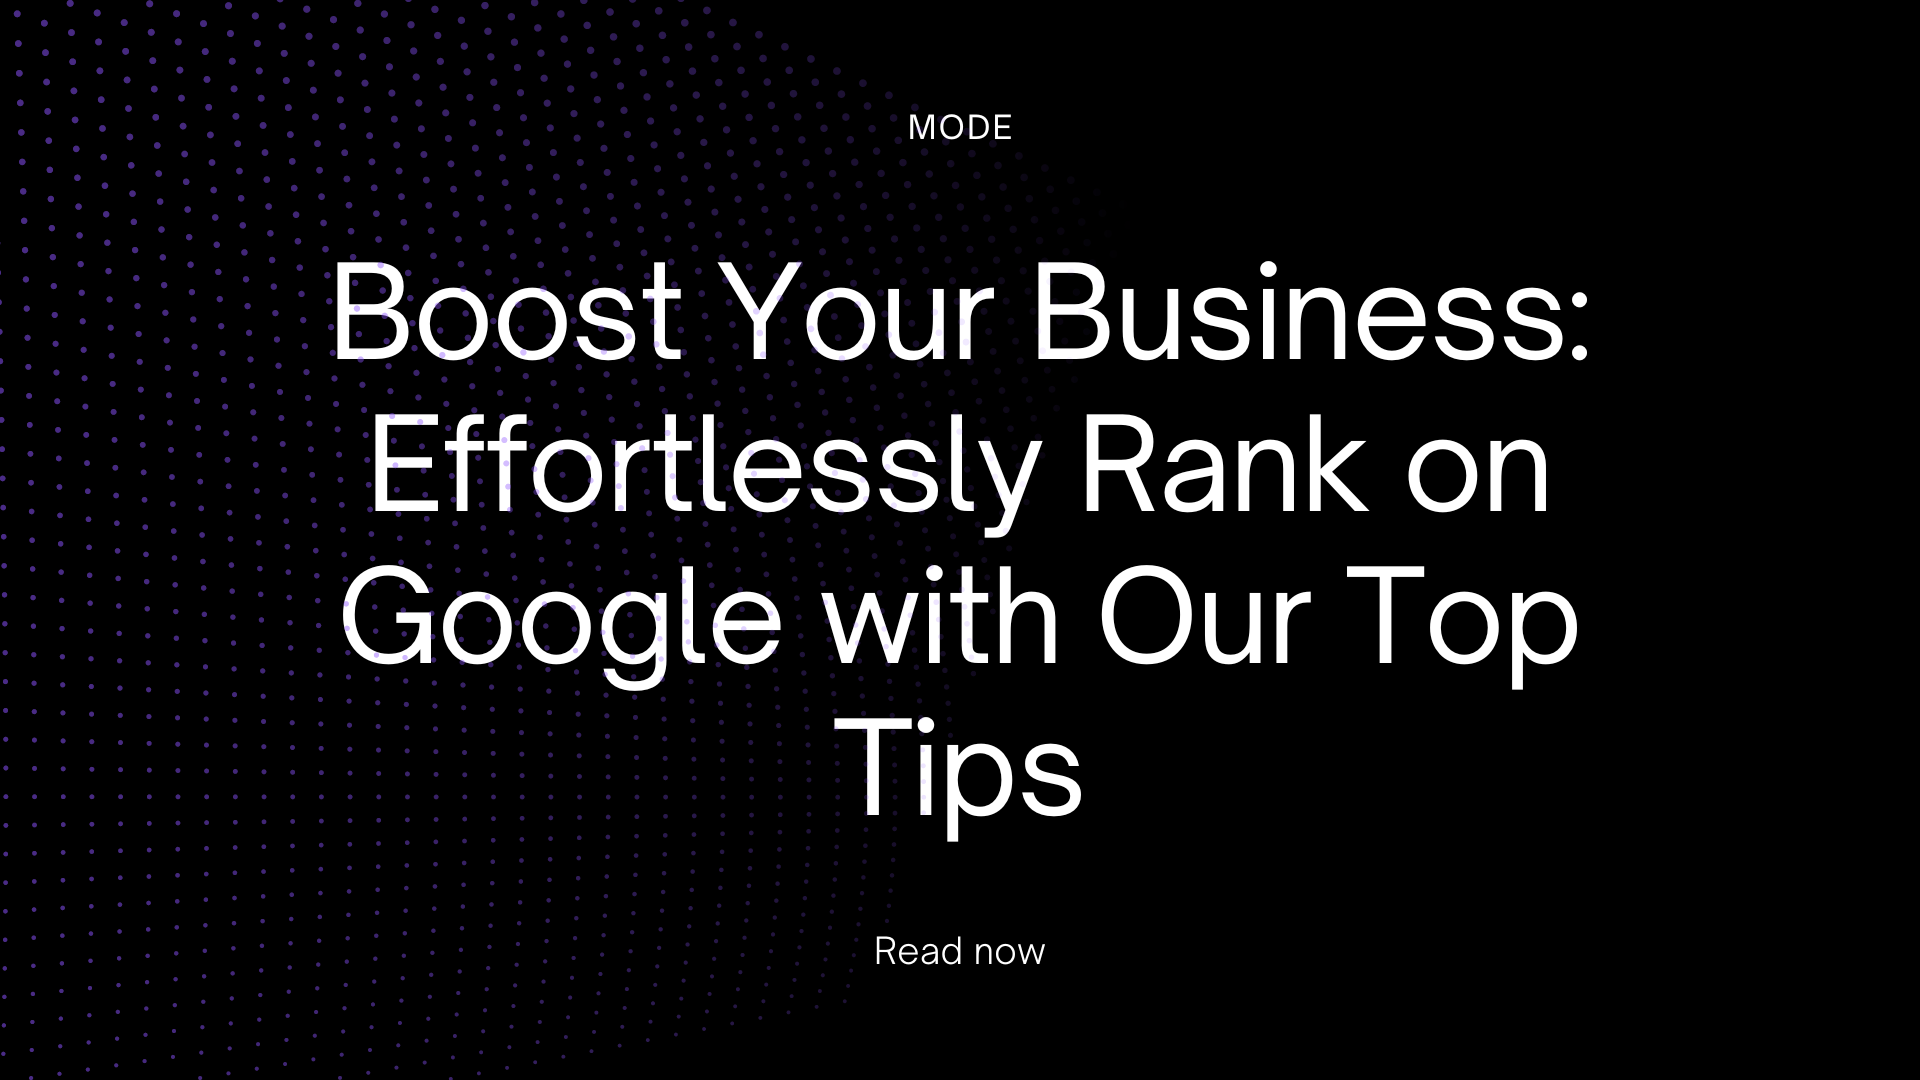 Boost Your Business: Effortlessly Rank on Google with Our Top Tips